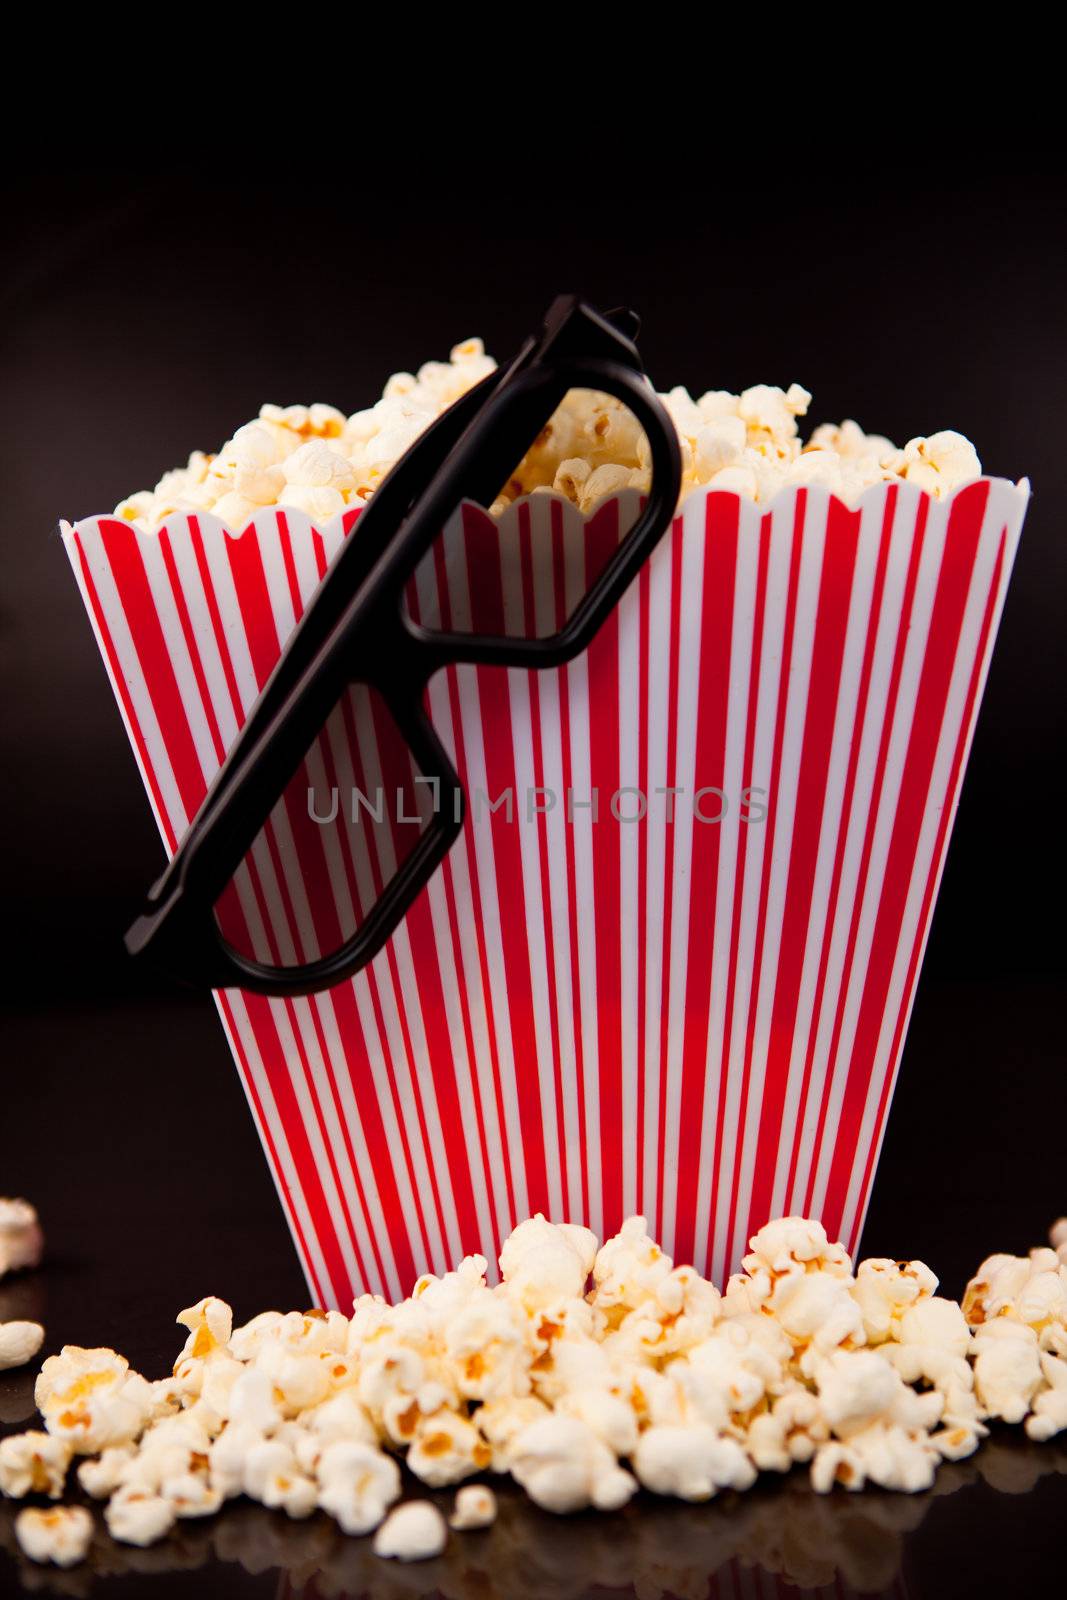 3D Glasses hanging on a box full of popcorn by Wavebreakmedia